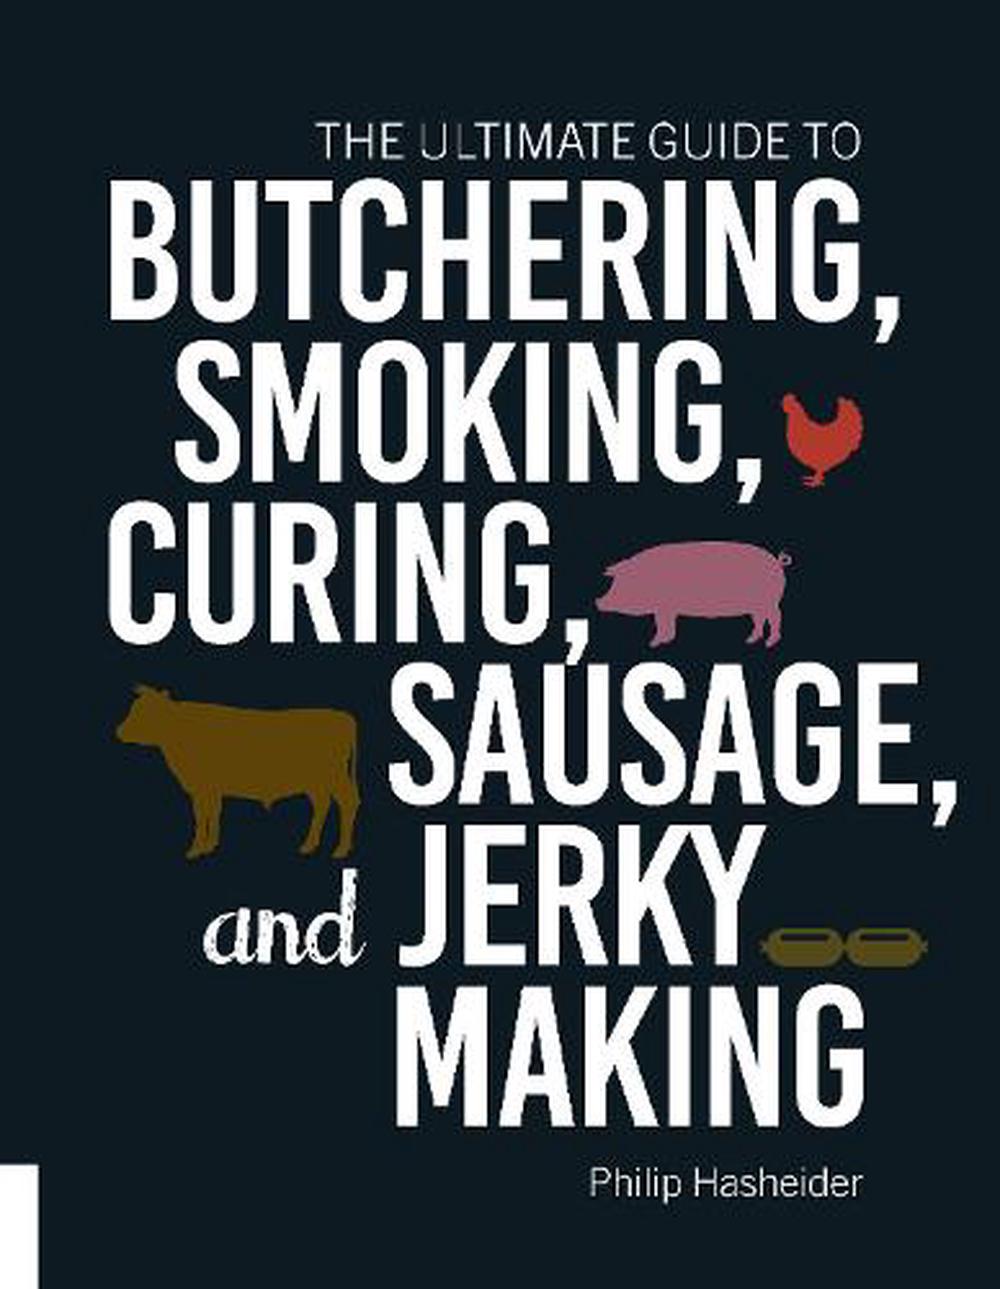 Ultimate Guide to Butchering, Smoking, Curing, Sausage | Buster McGee